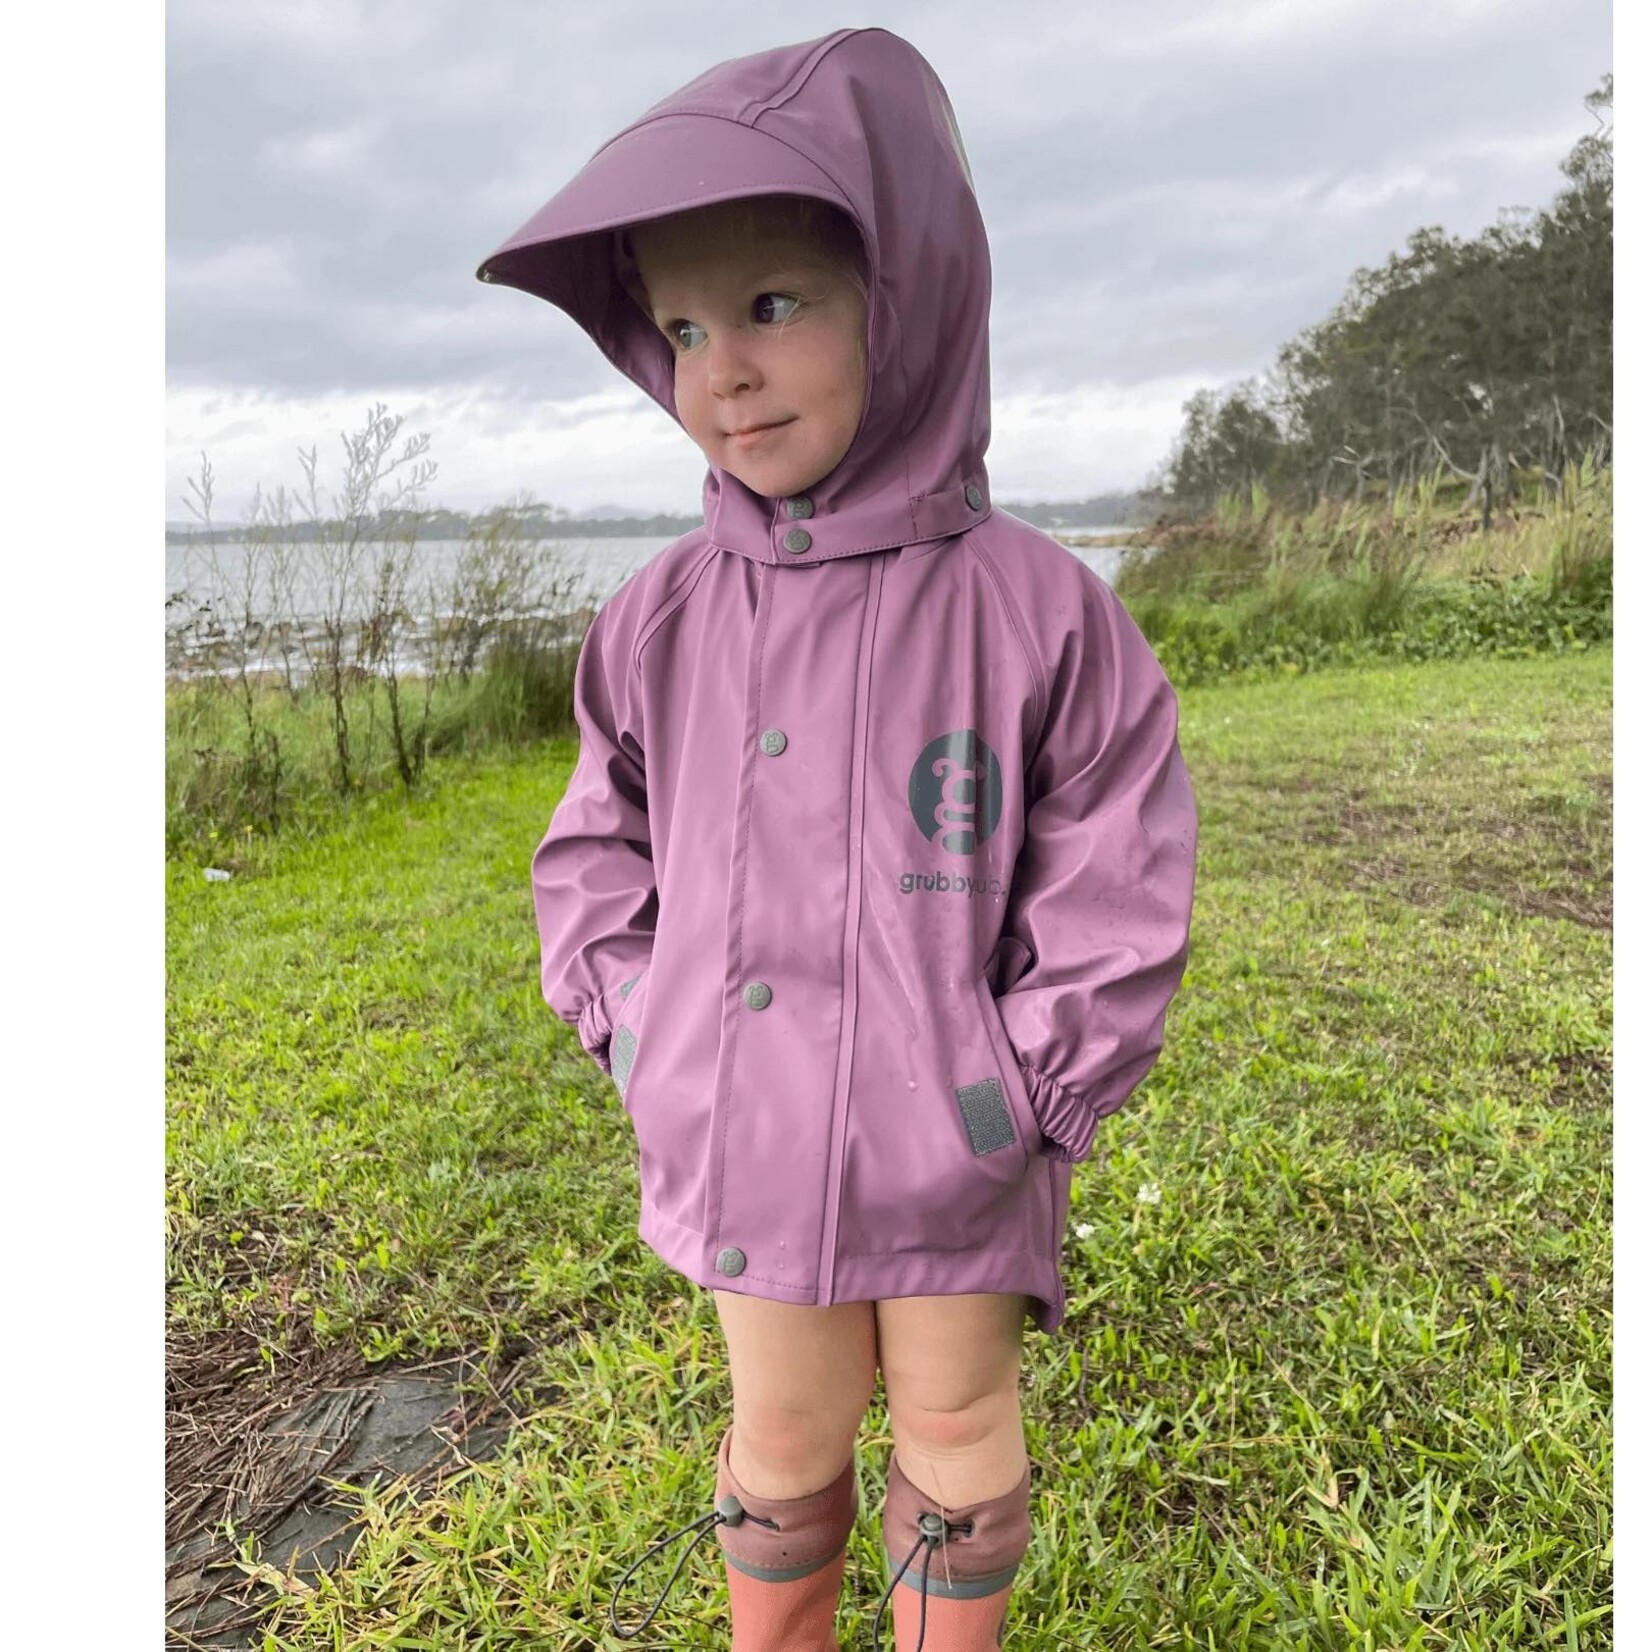 Grubbybub All-Weather Jacket with Mud Guard Plum